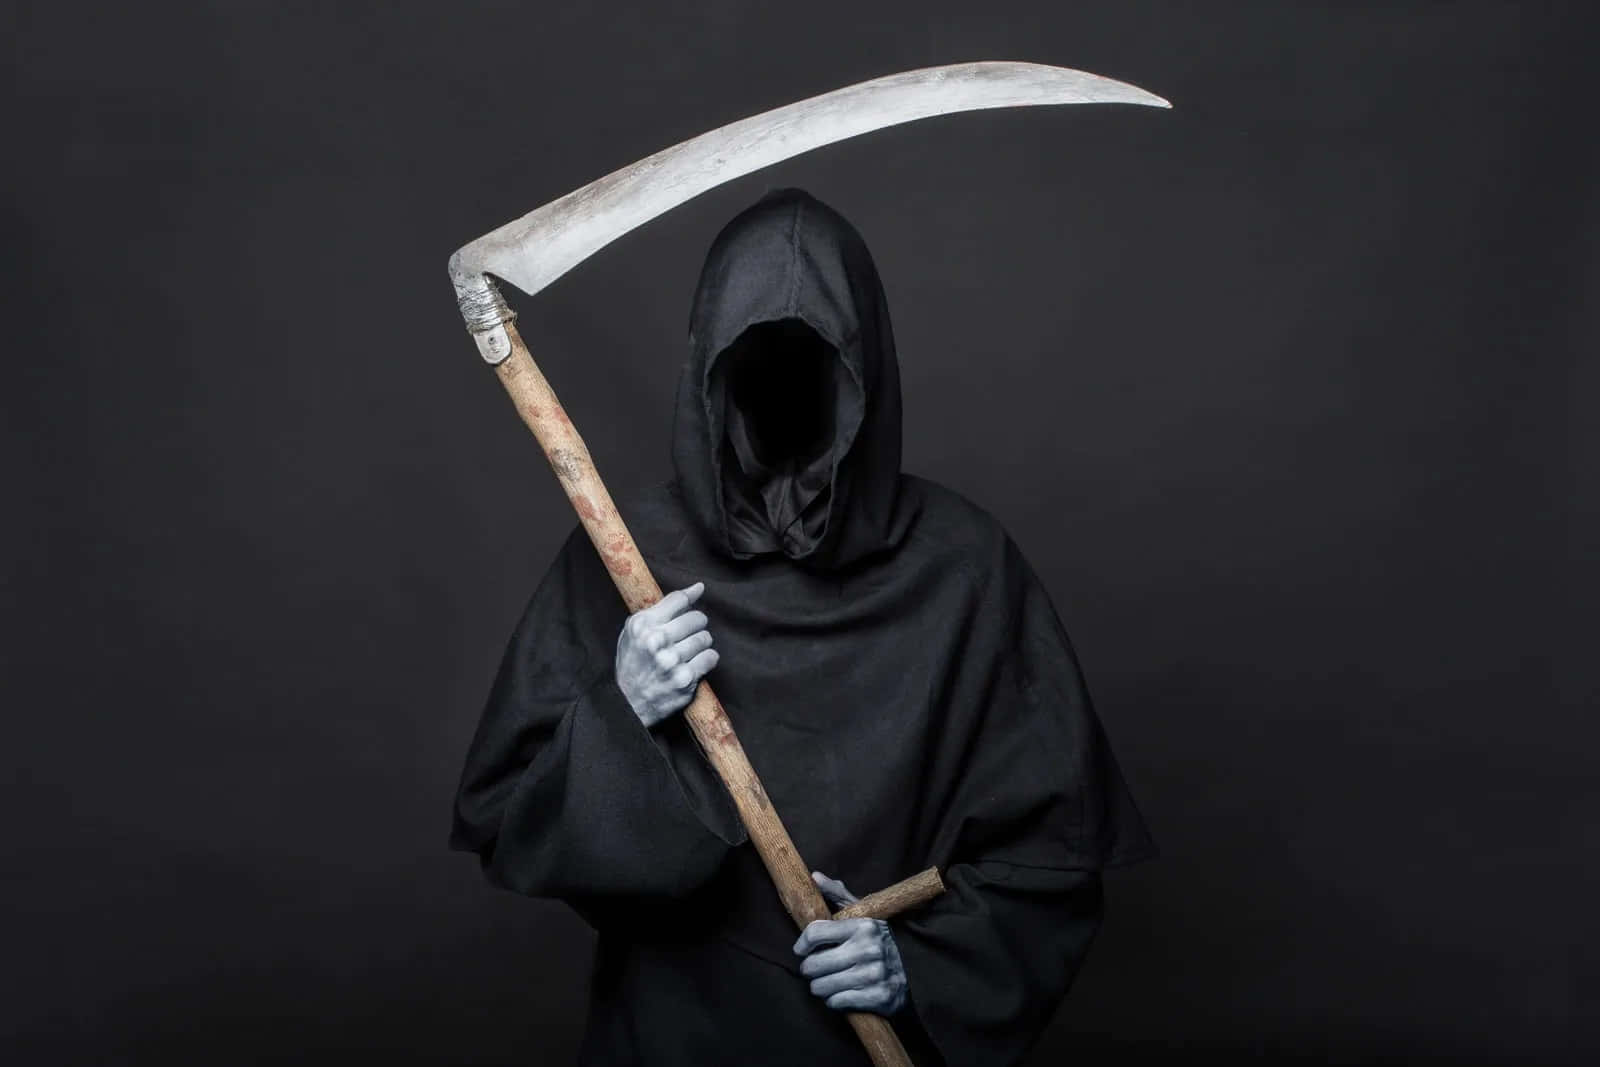 'The Grim Reaper: a grave reminder of life's impermanence.'